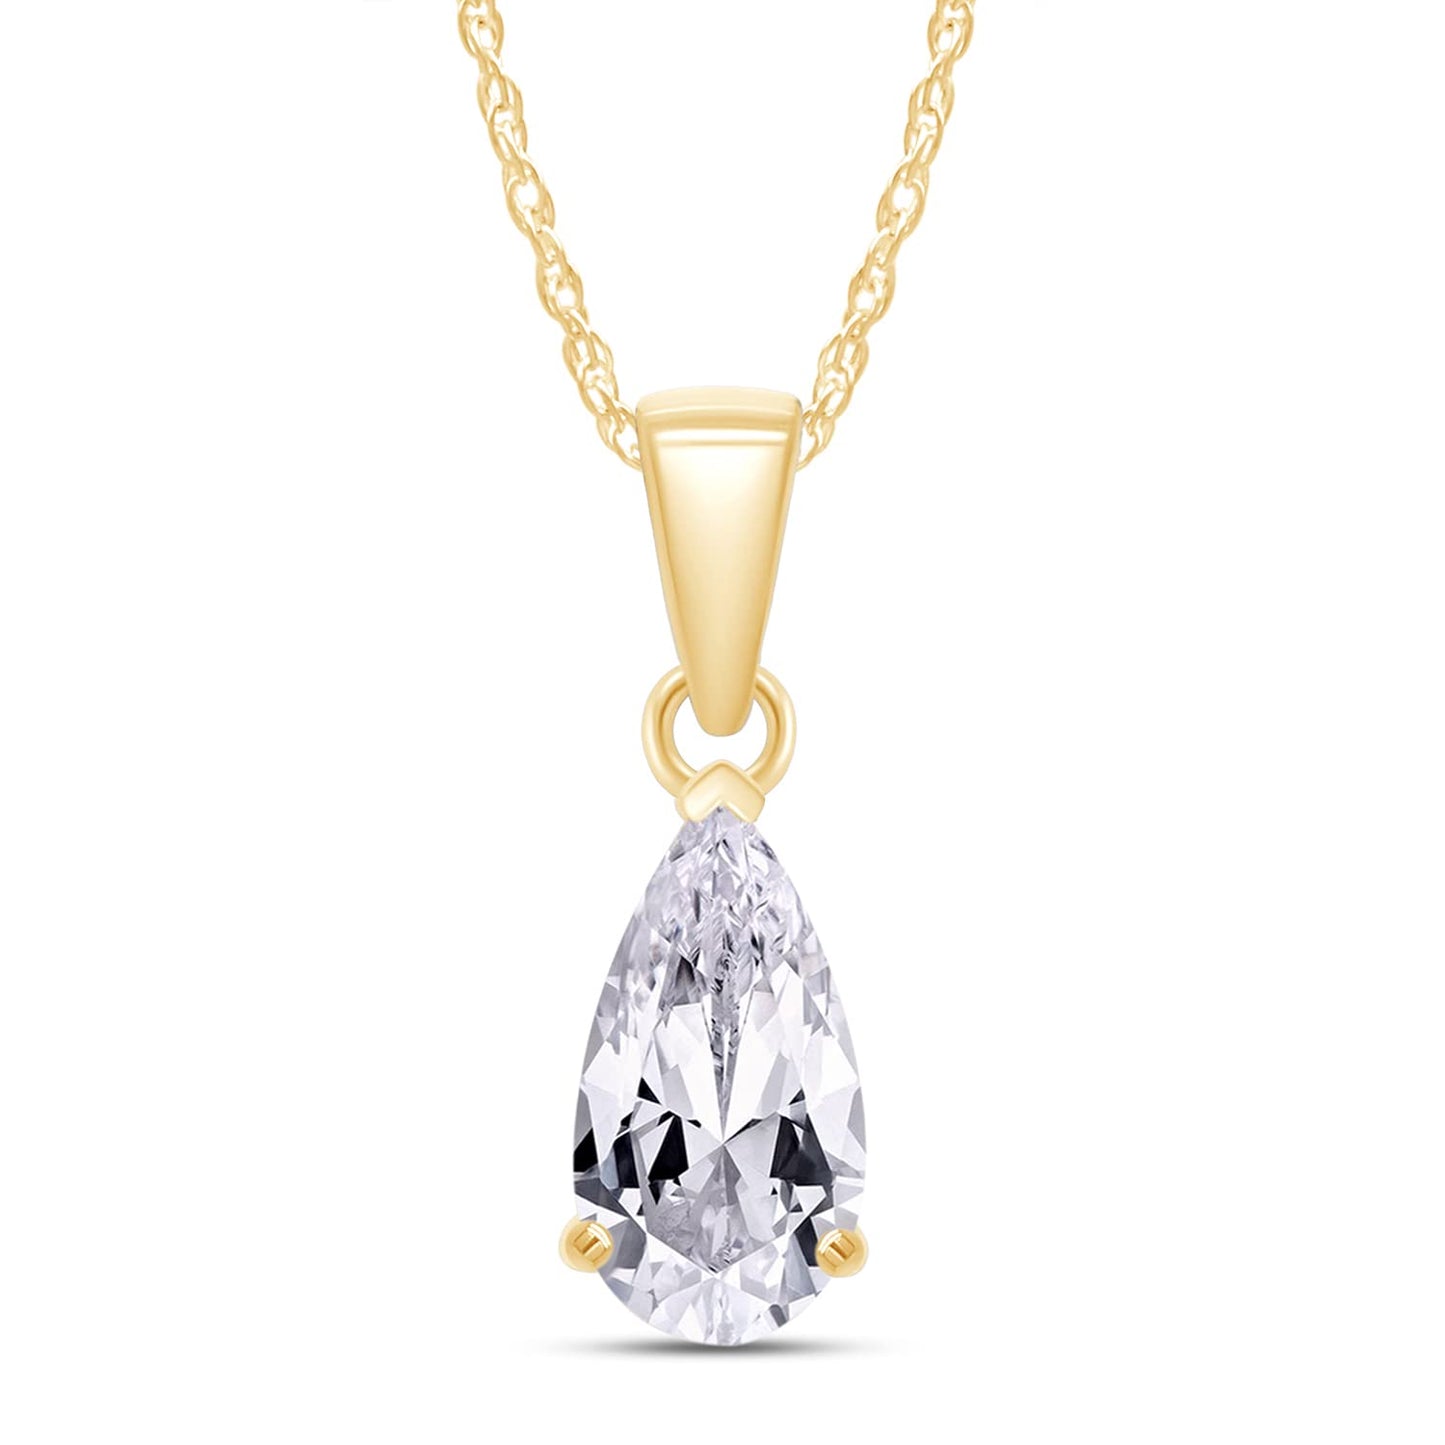 Load image into Gallery viewer, 1 Carat 10X5MM Pear Cut Lab Created Moissanite Diamond Solitaire Pendant Necklace In 925 Sterling Silver (1 Cttw)
